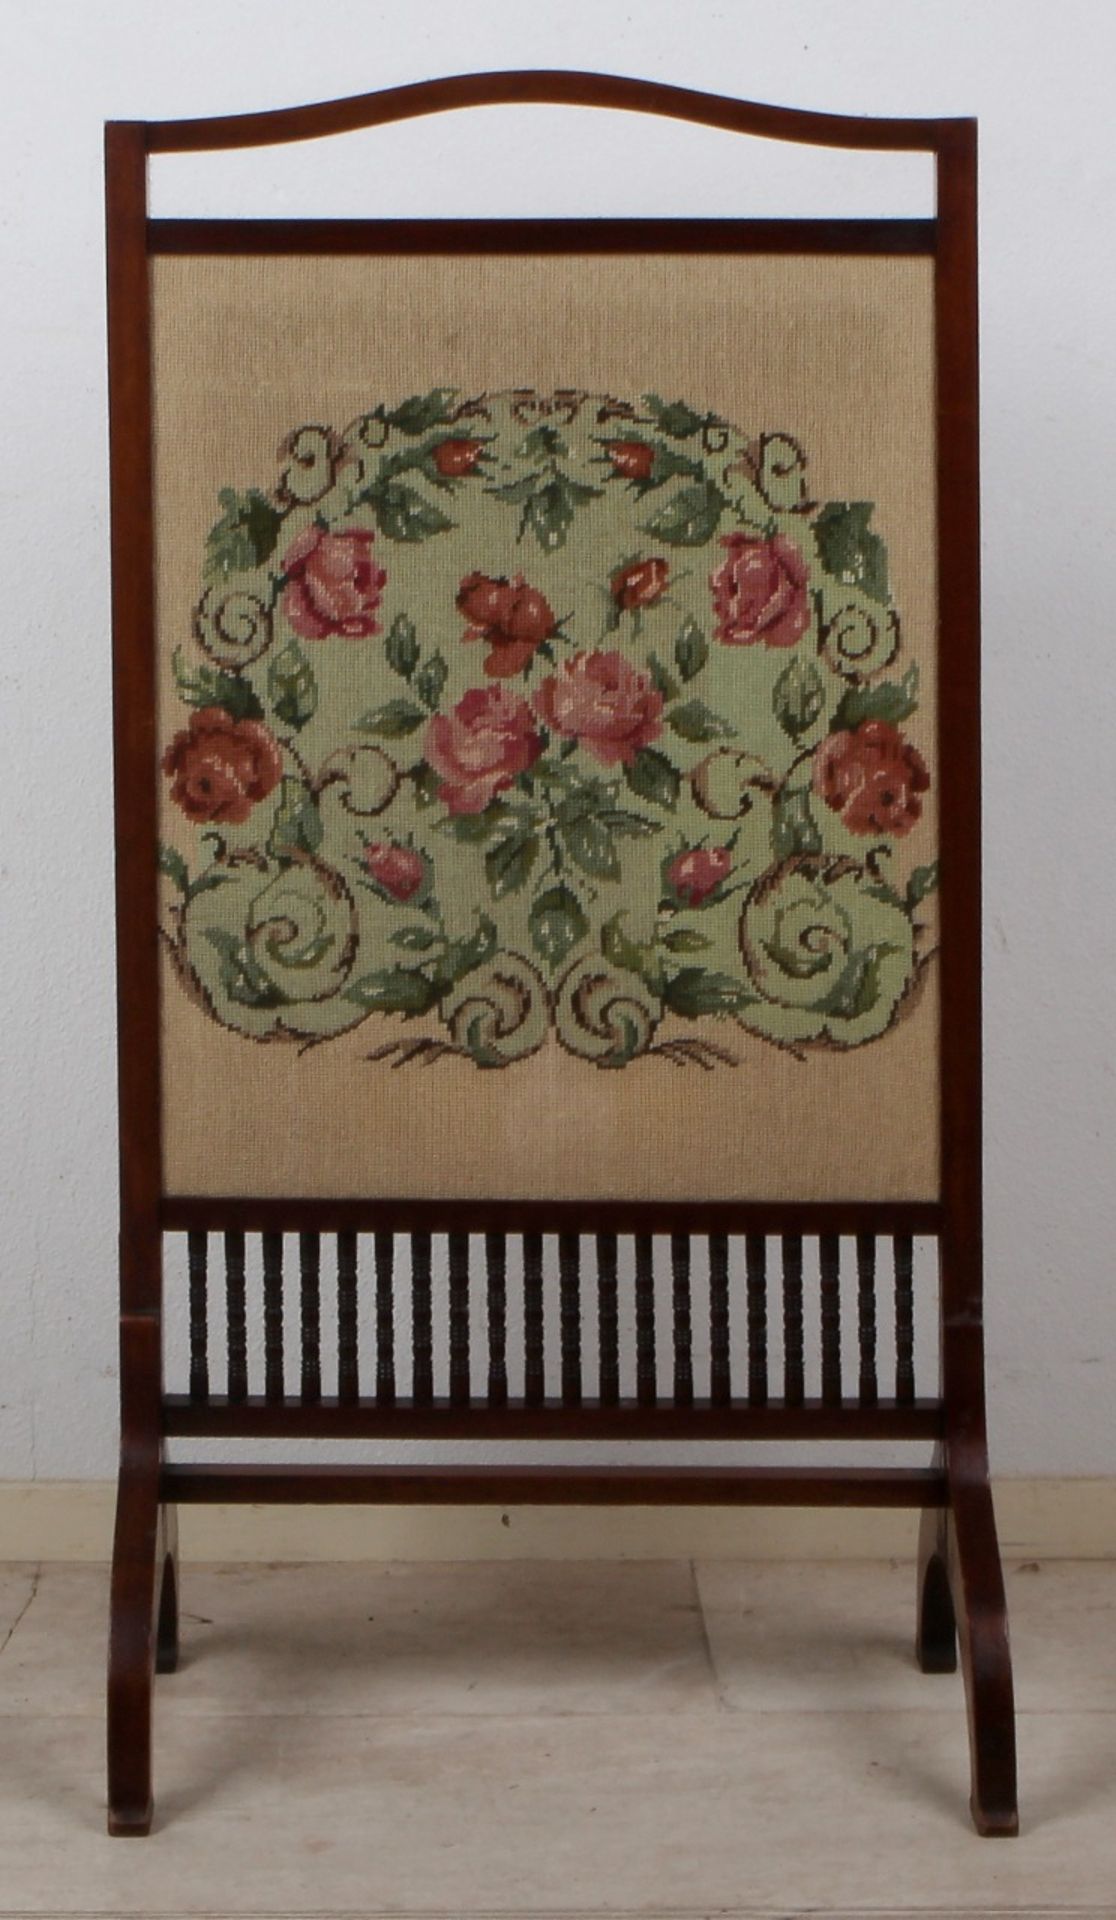 Antique English mahogany fireplace screen with embroidery, ca 1900, 102x50 cm. In good condition.